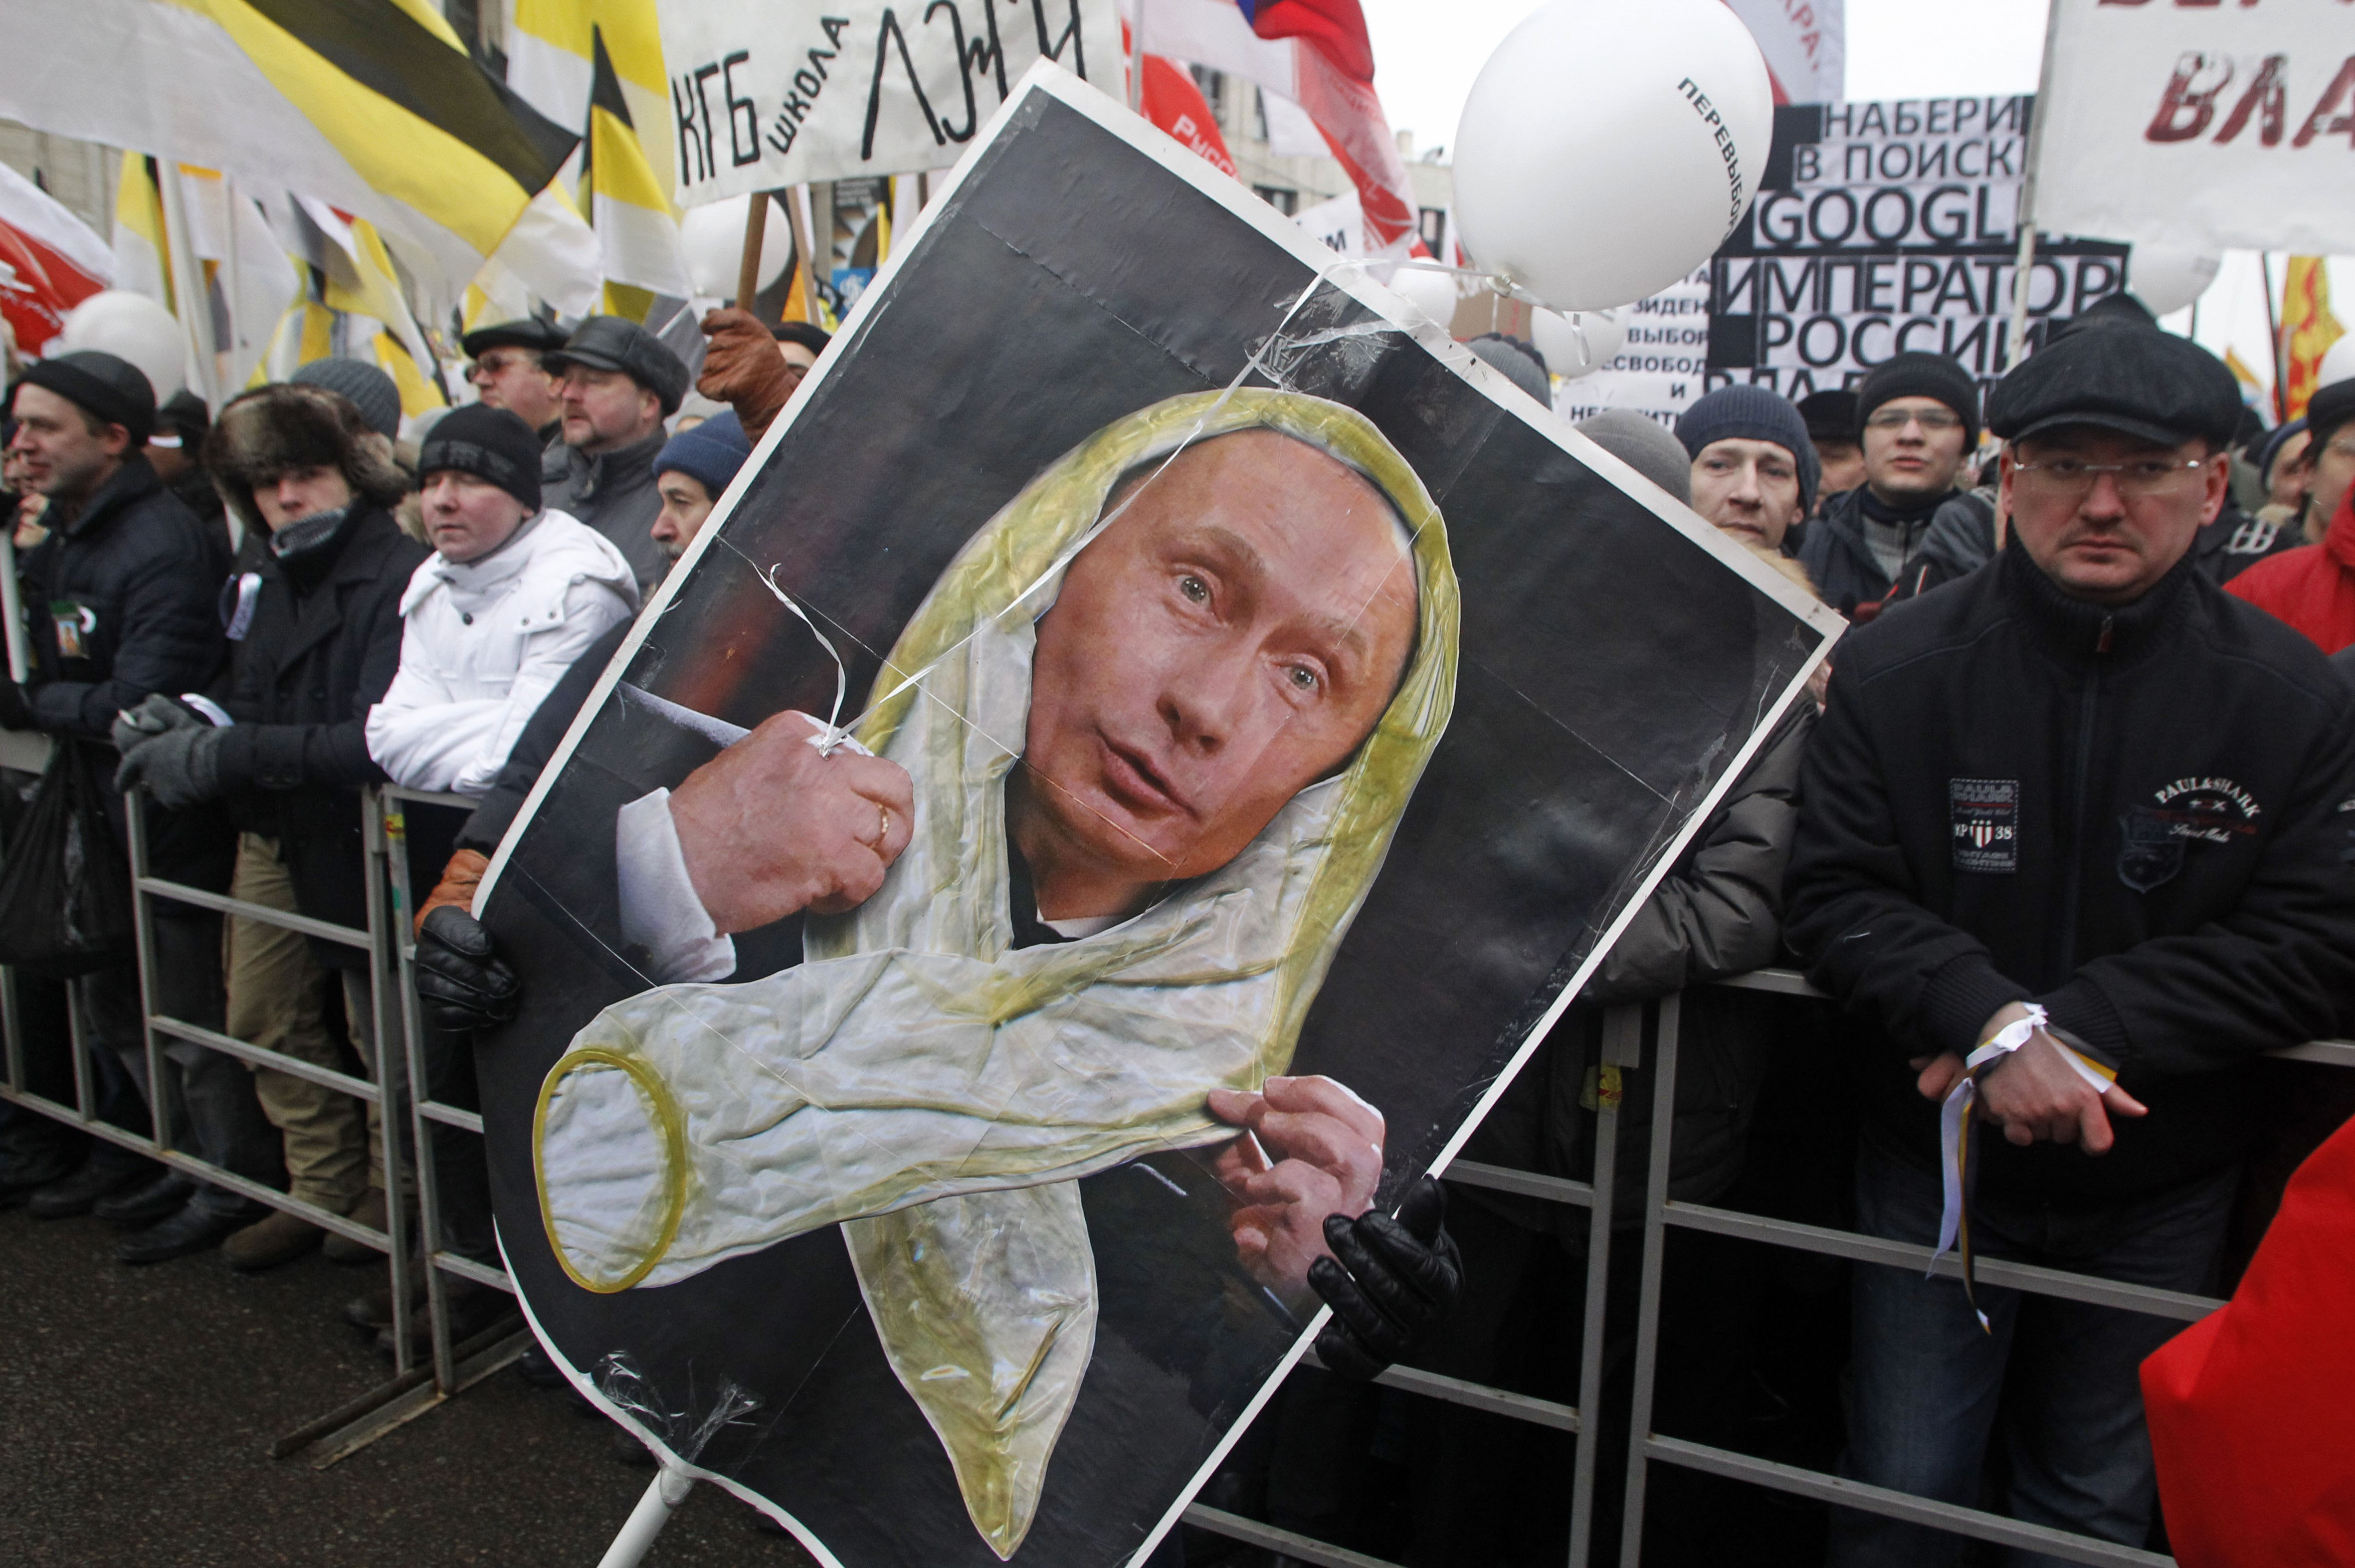 This is  a  Saturday, Dec. 24, 2011 file photo of  protesters holding a portrait of Russian Prime Minister Vladimir Putin changed by an unidentified satirical artist to show him wearing a condom, during a protest against alleged vote rigging in Russia's parliamentary elections in Moscow, Russia (Mikhail Metzel—AP)